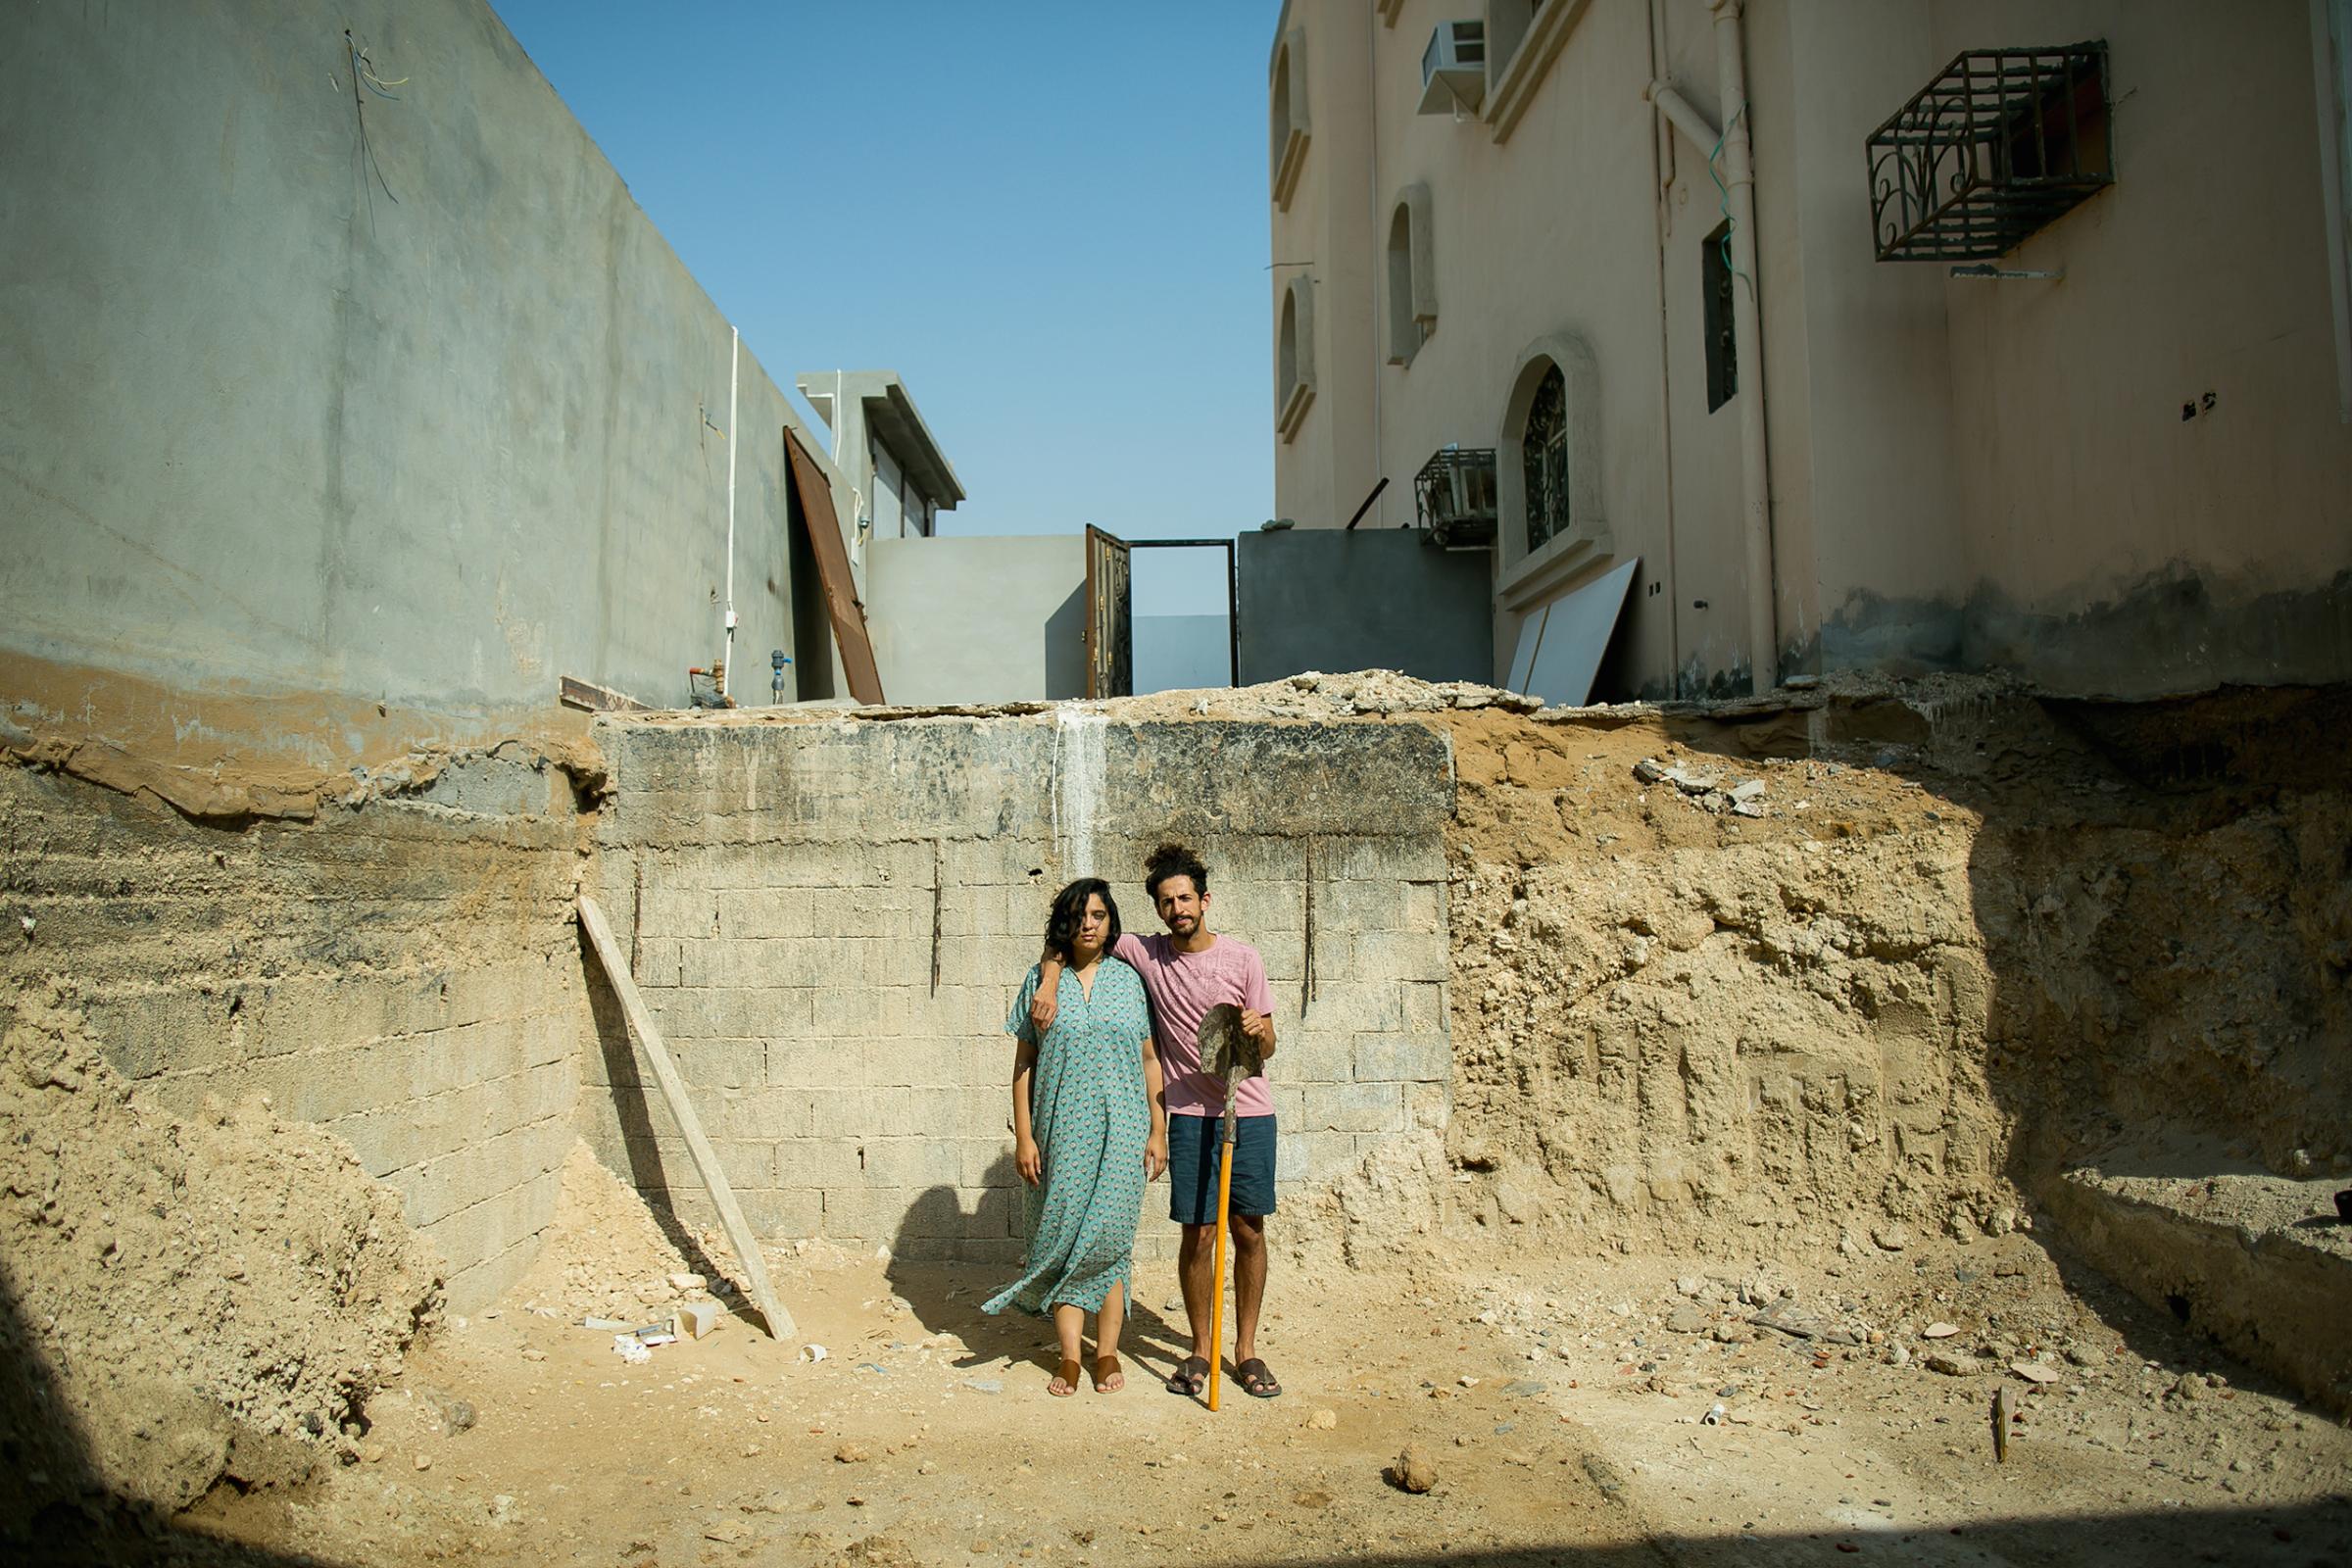 Raneen, an art curator and gallery owner, and Hisham, a comedian and actor, opted for a Saudi-style "American Gothic" portrait in their unfinished swimming pool in Jeddah, December 2015. "I first met her on Twitter, then later in person," Hisham said. "Wanting nothing but fun, she told me off... I met her again at an ice cream shop. She charmed me with her happy ice cream dance." Raneen and Hisham were both previously married and divorced. Now married to each other, they realize their past mistakes. "We didn't believe in love, and were too cynical. We also thought of marriage as a duty. After we stopped searching for the one, that's when we met each other," he said.